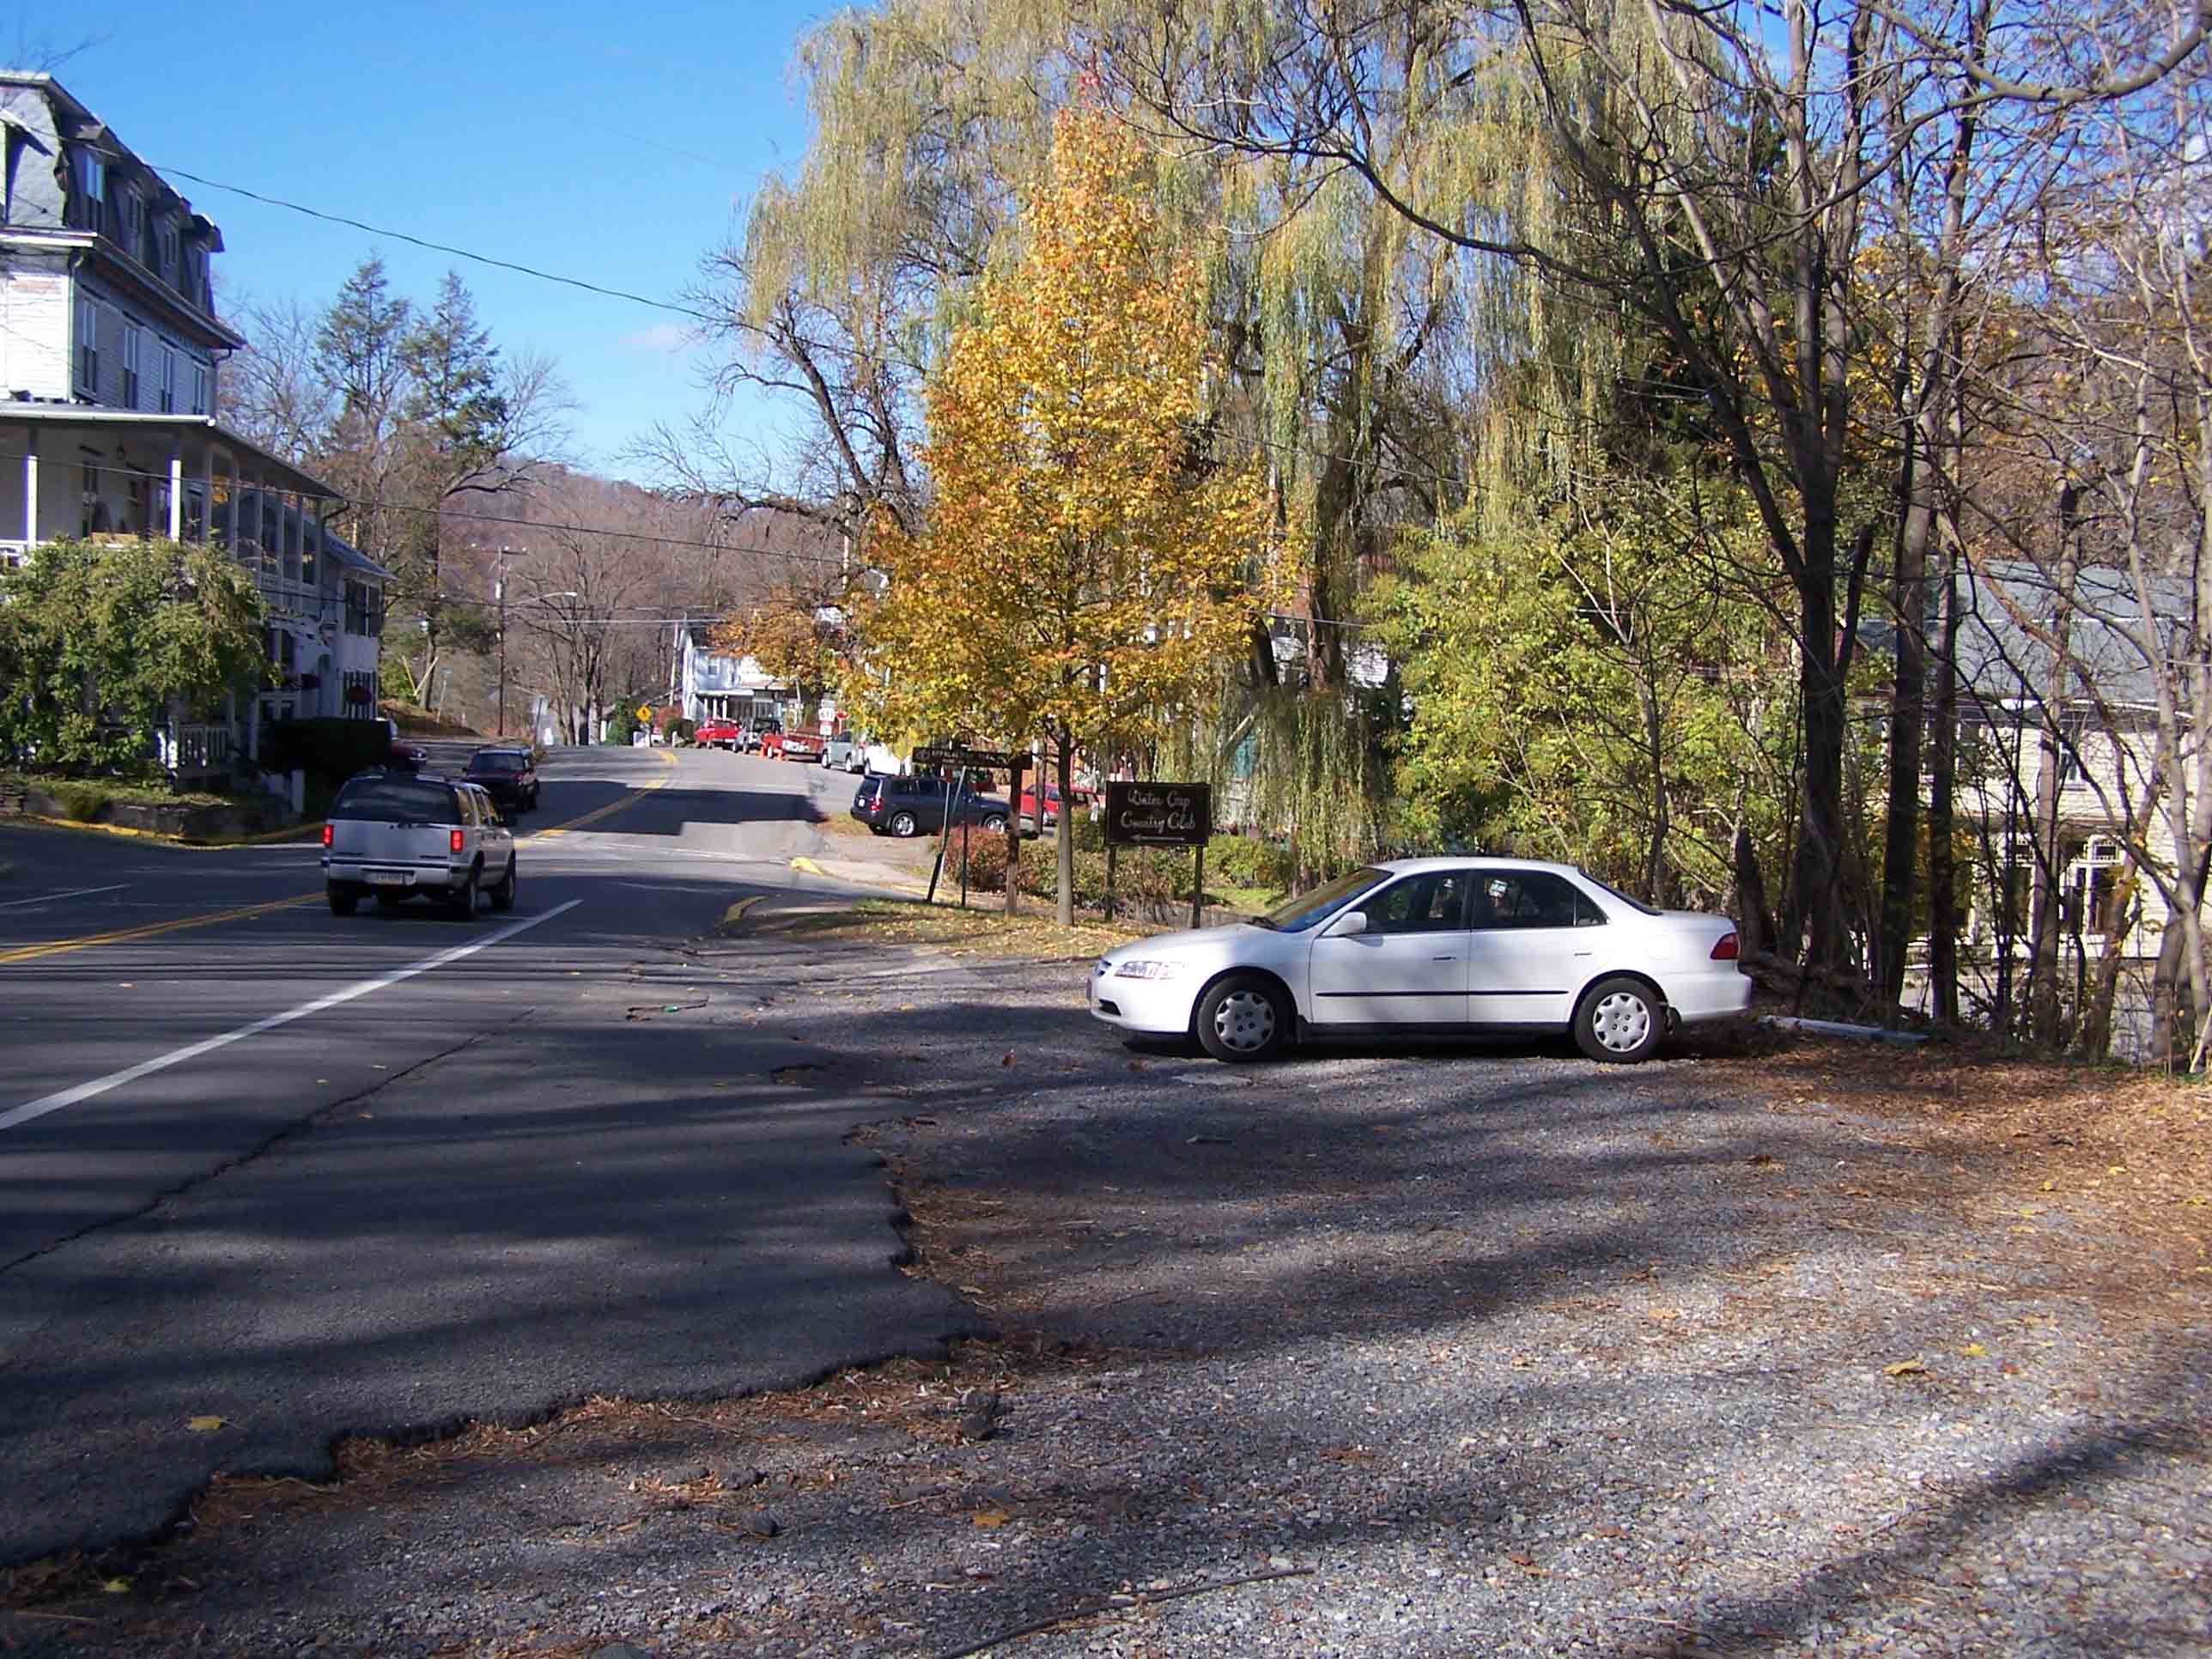 mm 0.2 - Parking at Waring, Main & Mountain Roads in Delaware Water Gap. Courtesy at@rohland.org